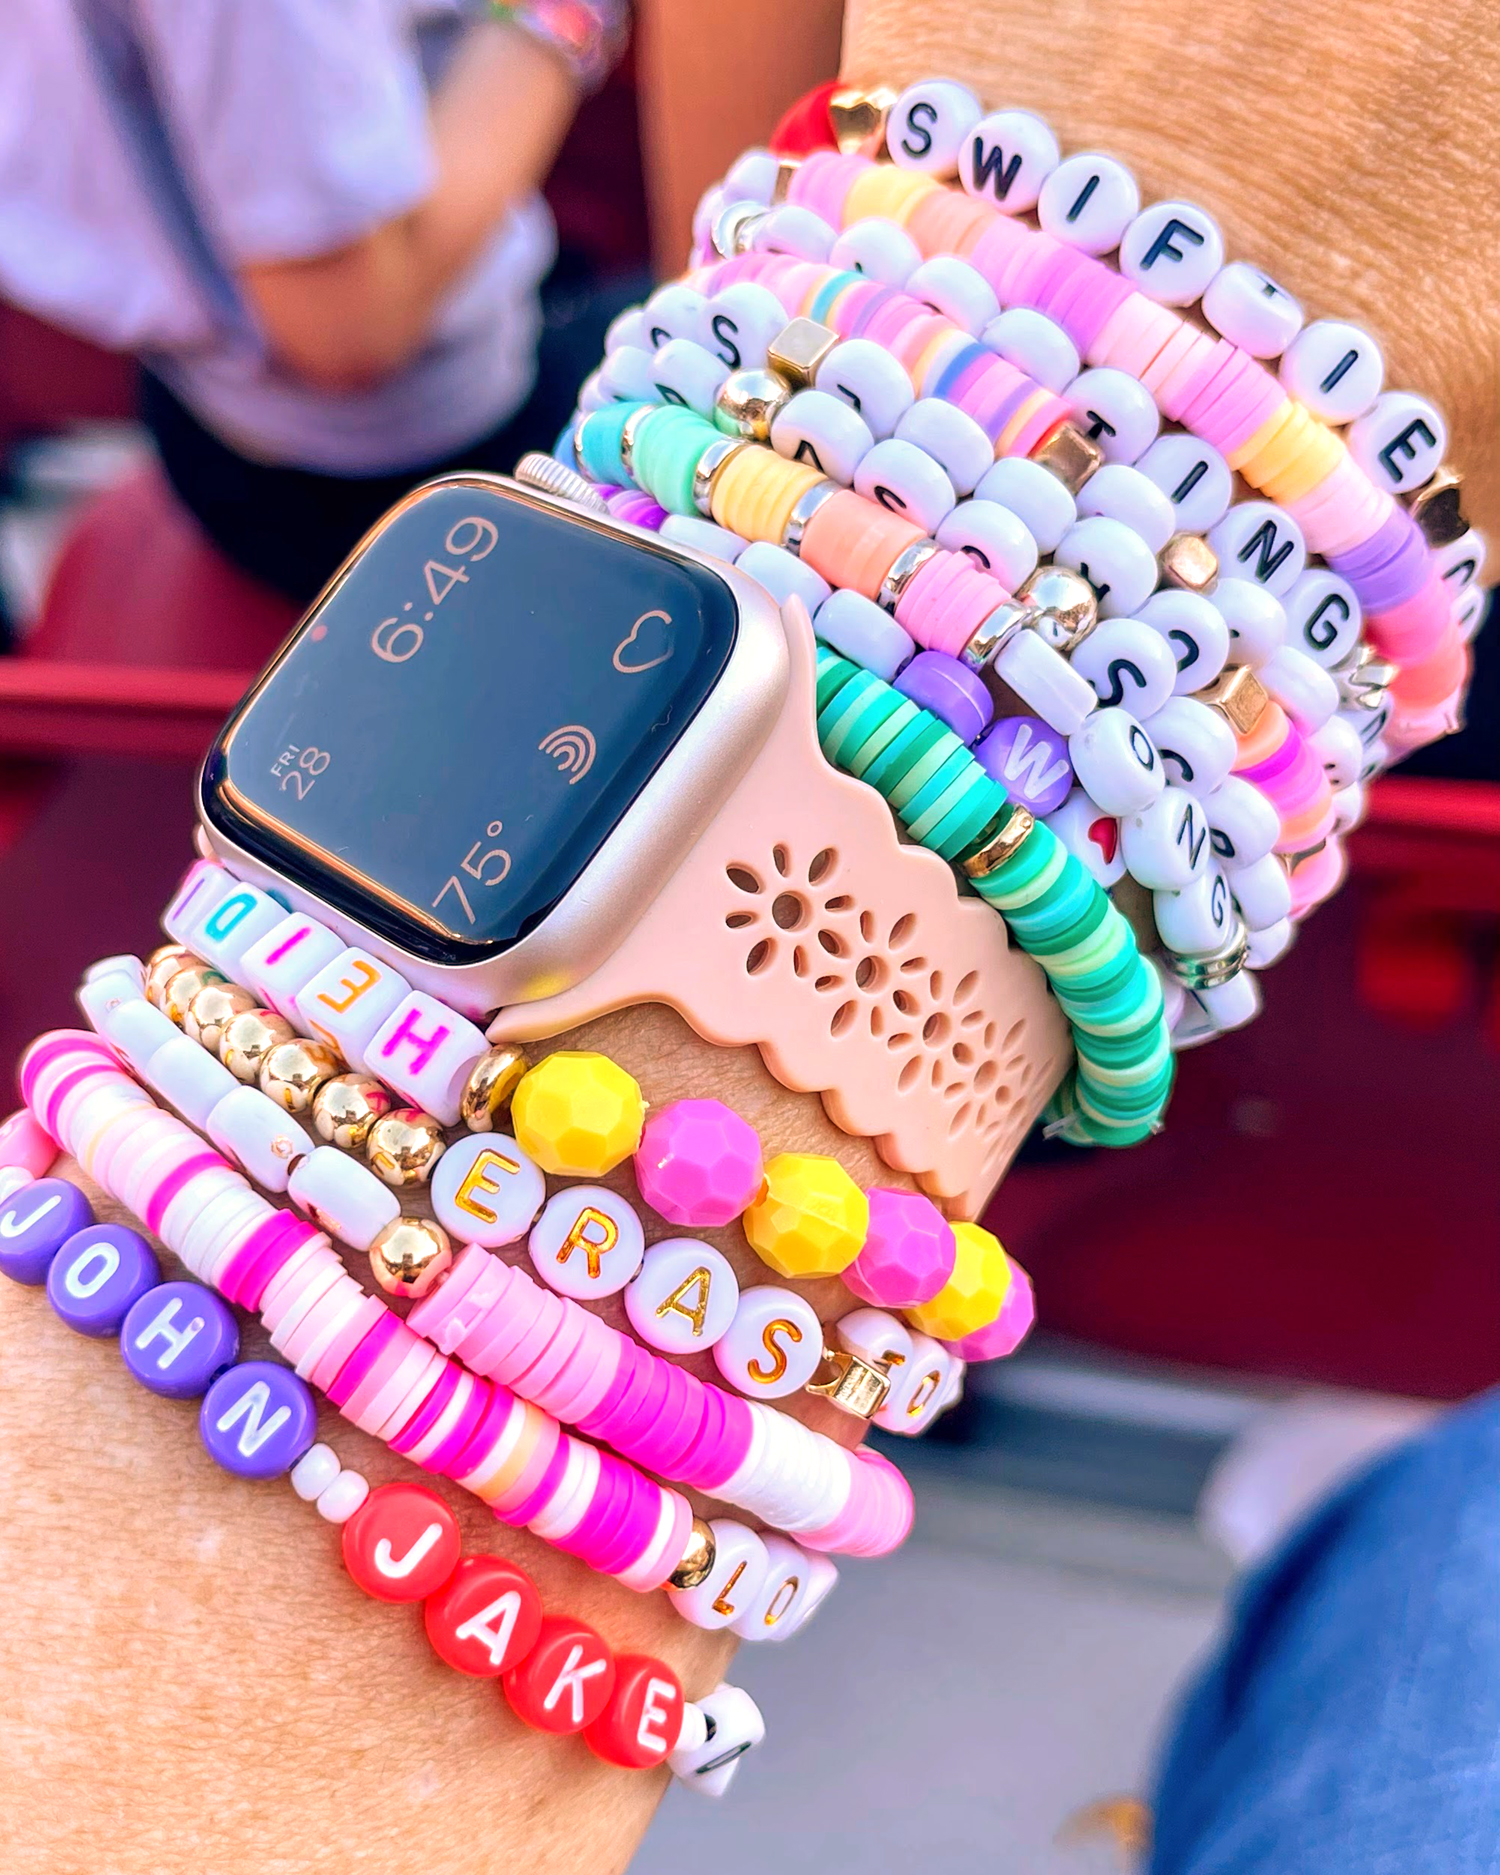 Wrist with watch and arm full of Taylor Swift Eras Tour beaded friendship bracelets